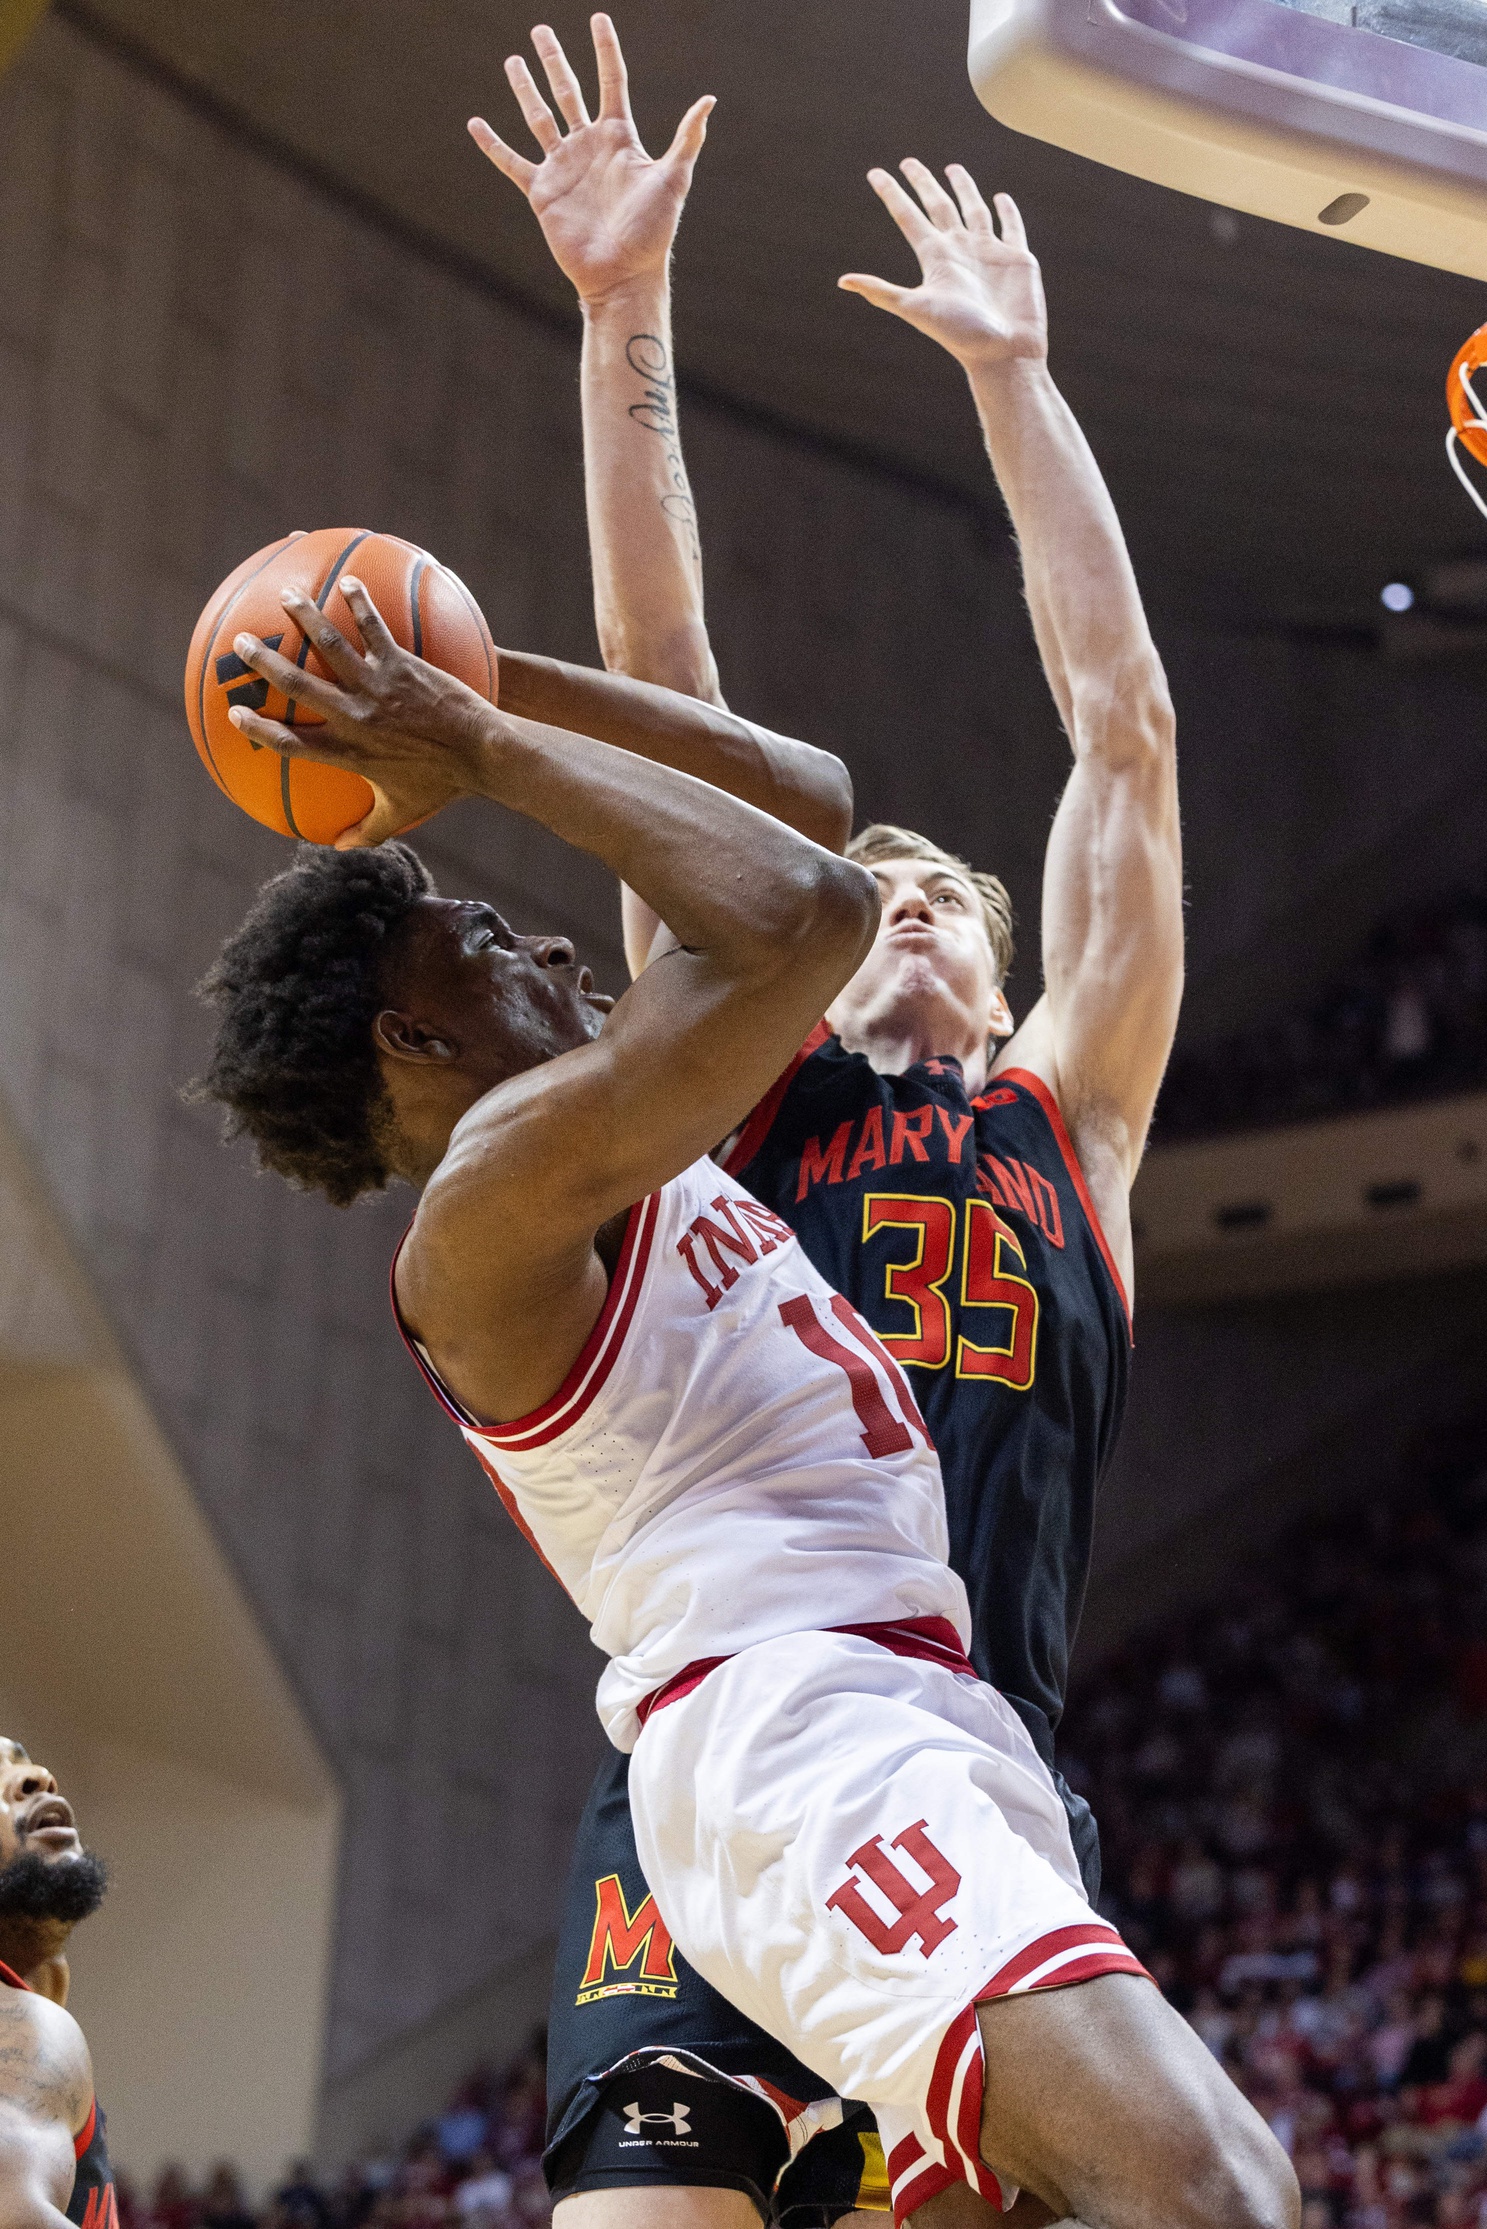  Indiana Hoosiers forward Kaleb Banks (10) shoots the ball against Maryland Terrapins center Caelum Swanton-Rodger (35) on defense at Simon Skjodt Assembly Hall. 